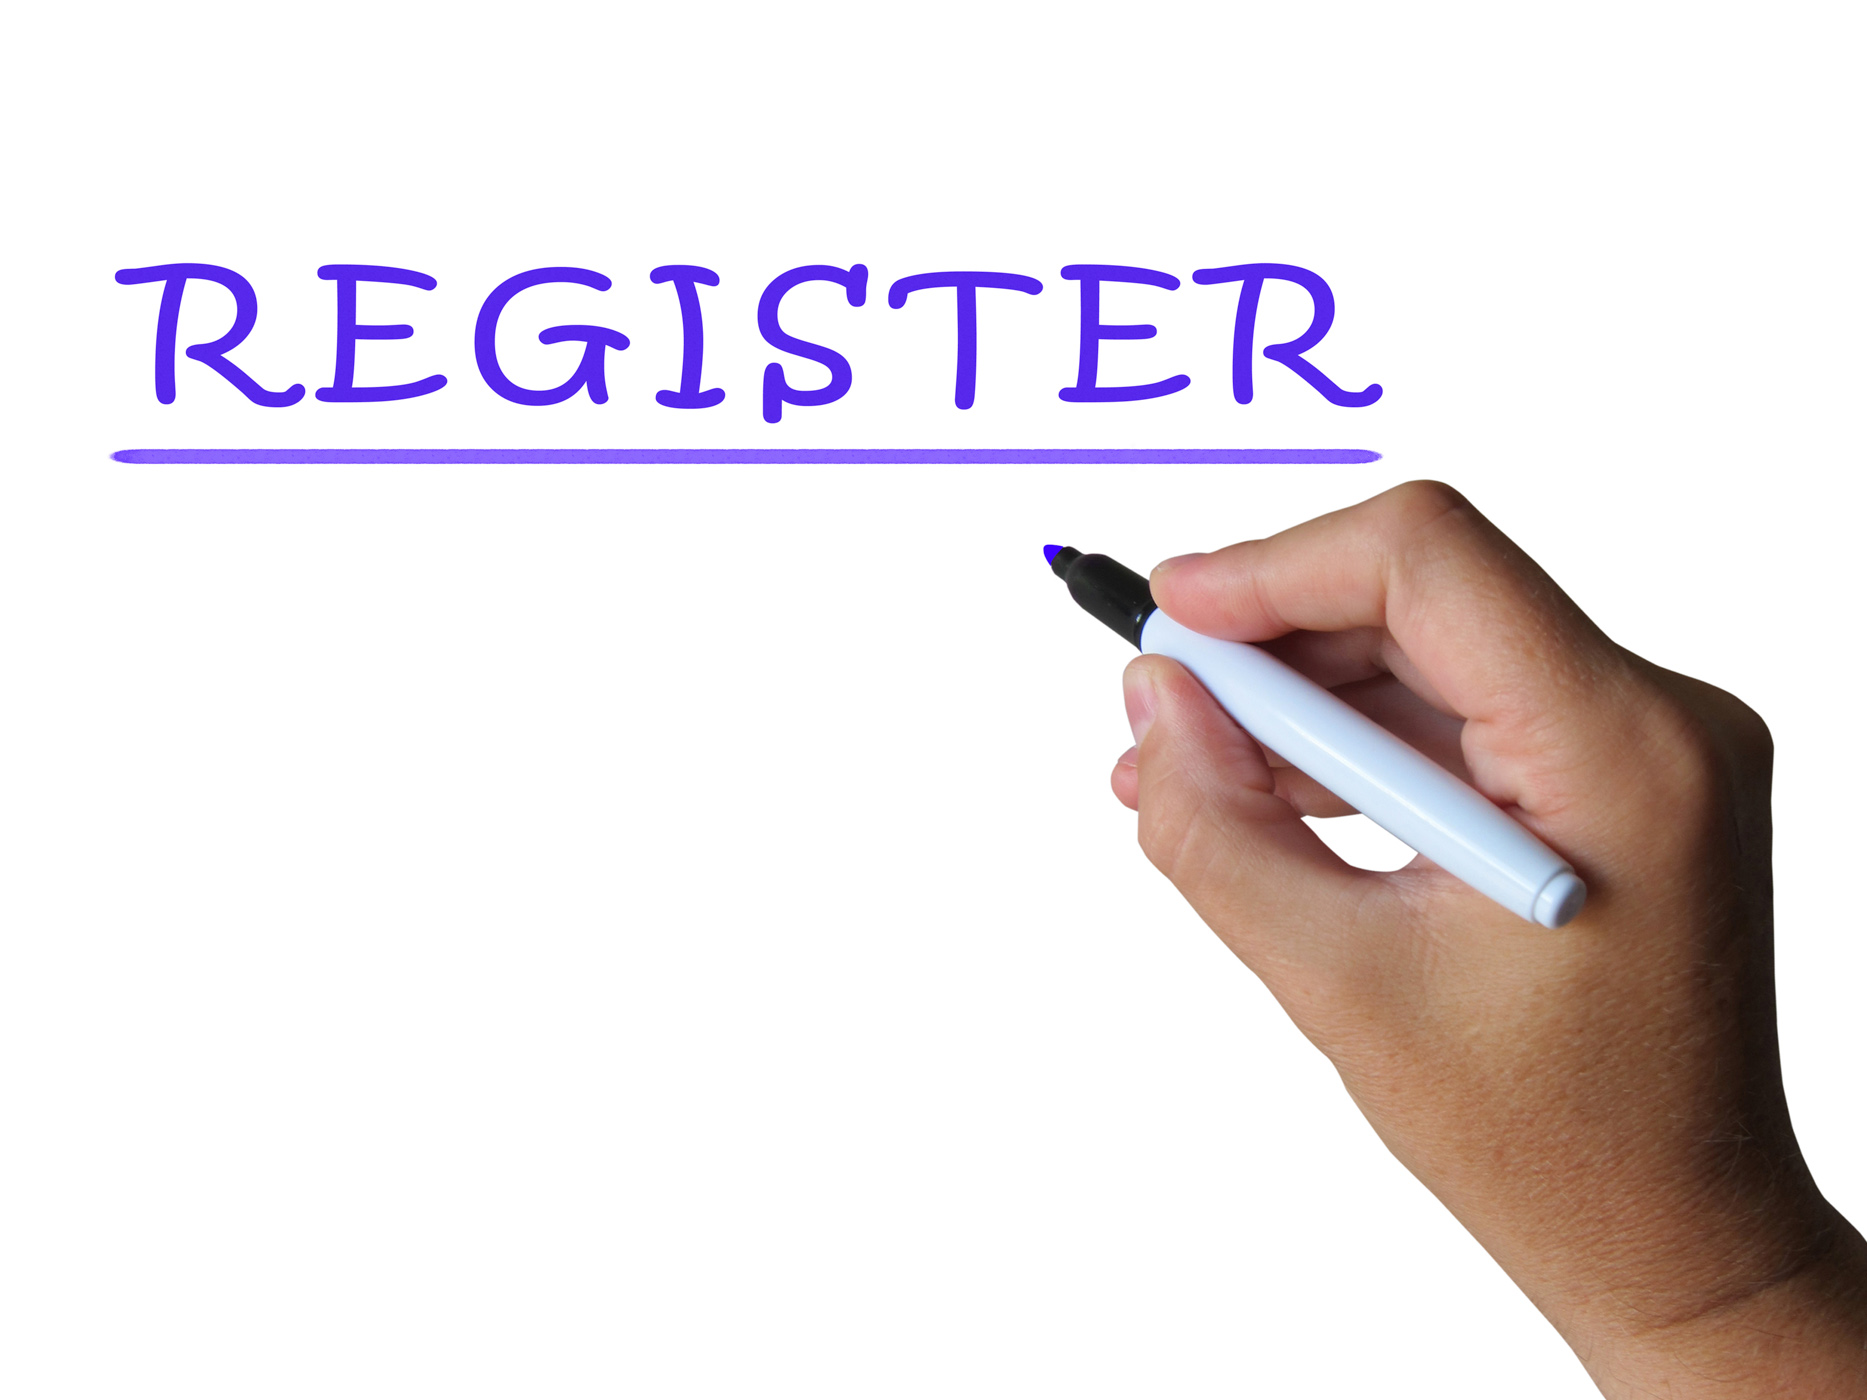 Register word shows sign up or check in photo